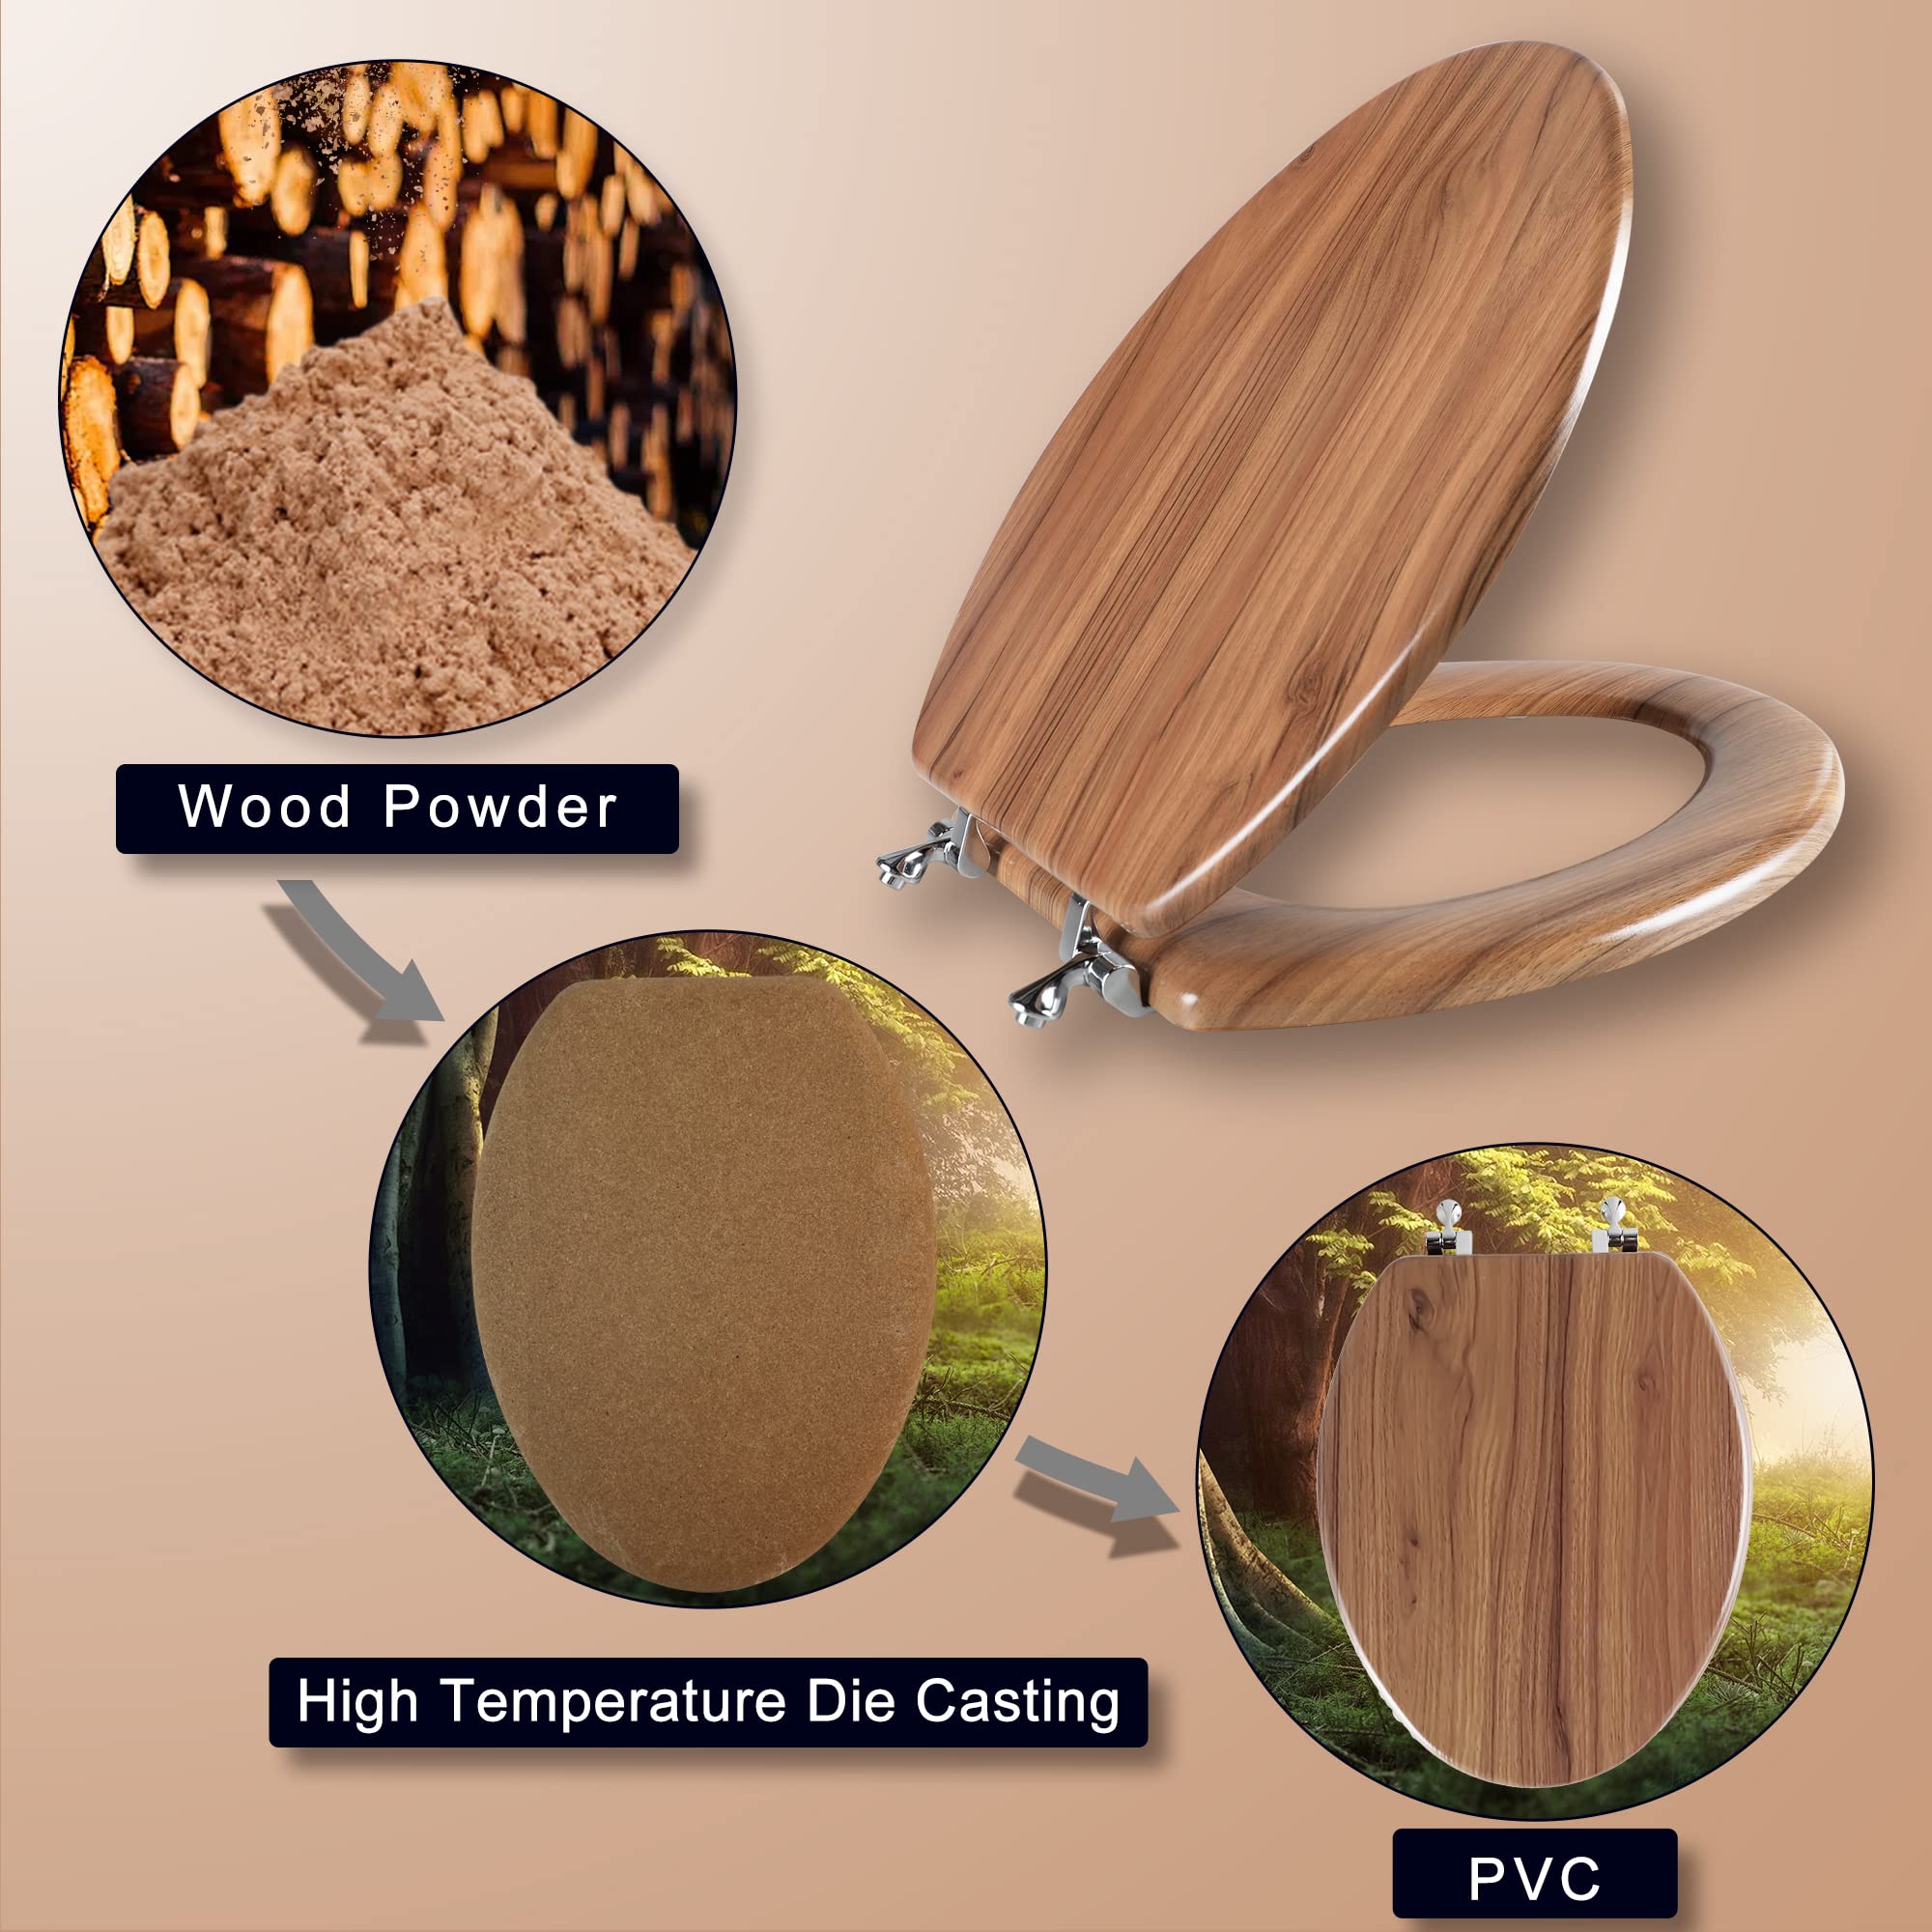 Elongated Toilet Seat Molded Wood Toilet Seat with Zinc Alloy Hinges, Easy to Install also Easy to Clean, Anti-pinch Wooden Toilet Seat by Angol Shiold (Elongated, Natural)